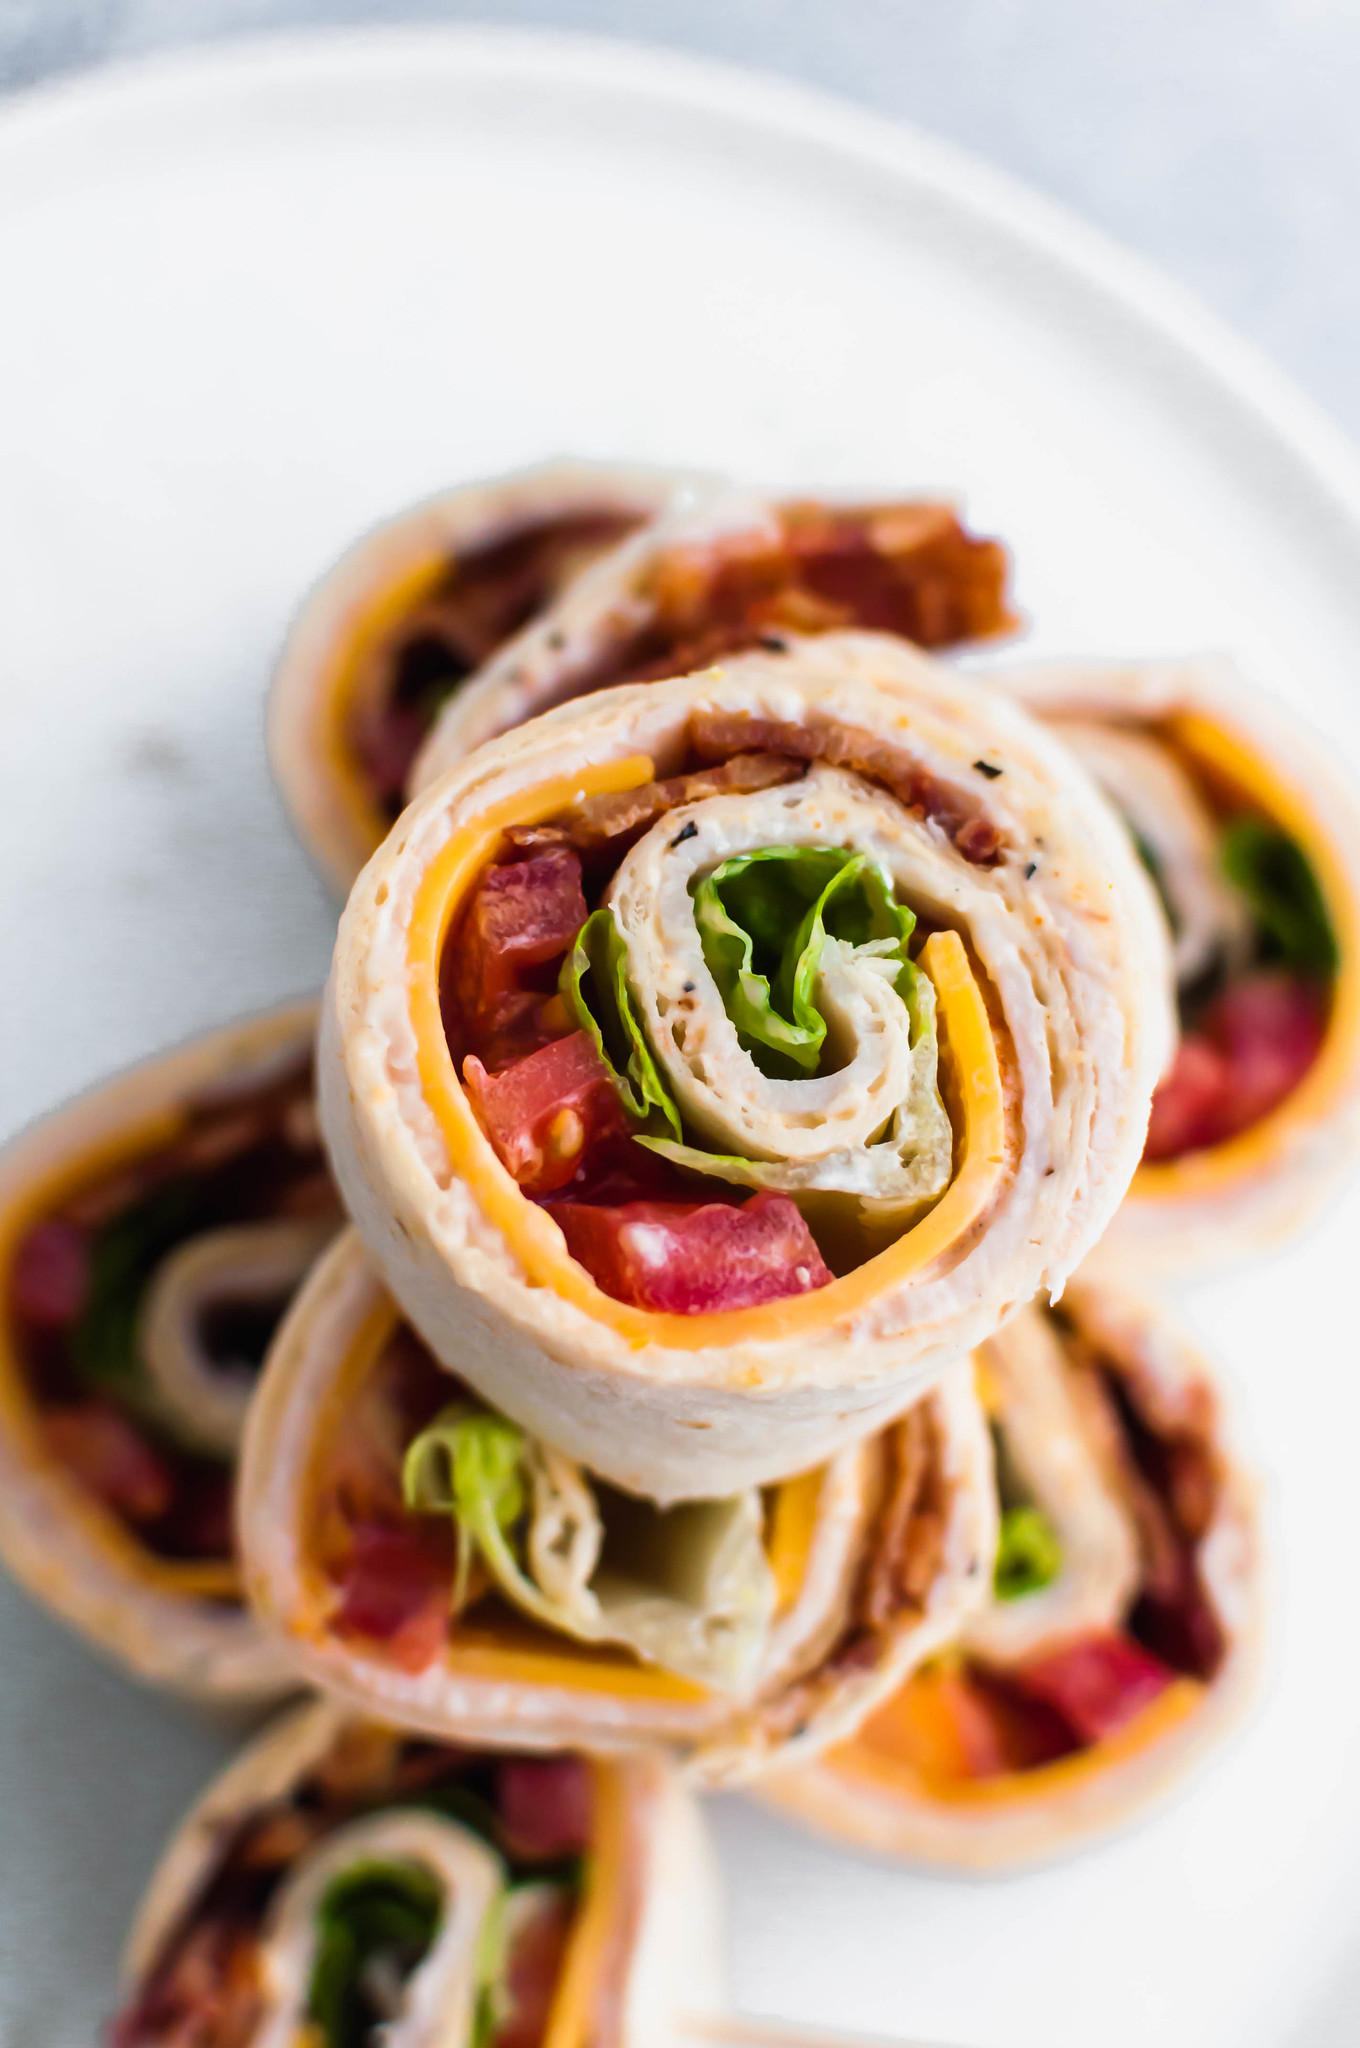 These Turkey Club Pinwheels make an easy lunch or appetizer any day. Spiced mayo, deli turkey and all the club fixings make this poppable bite totally irrestistable. 